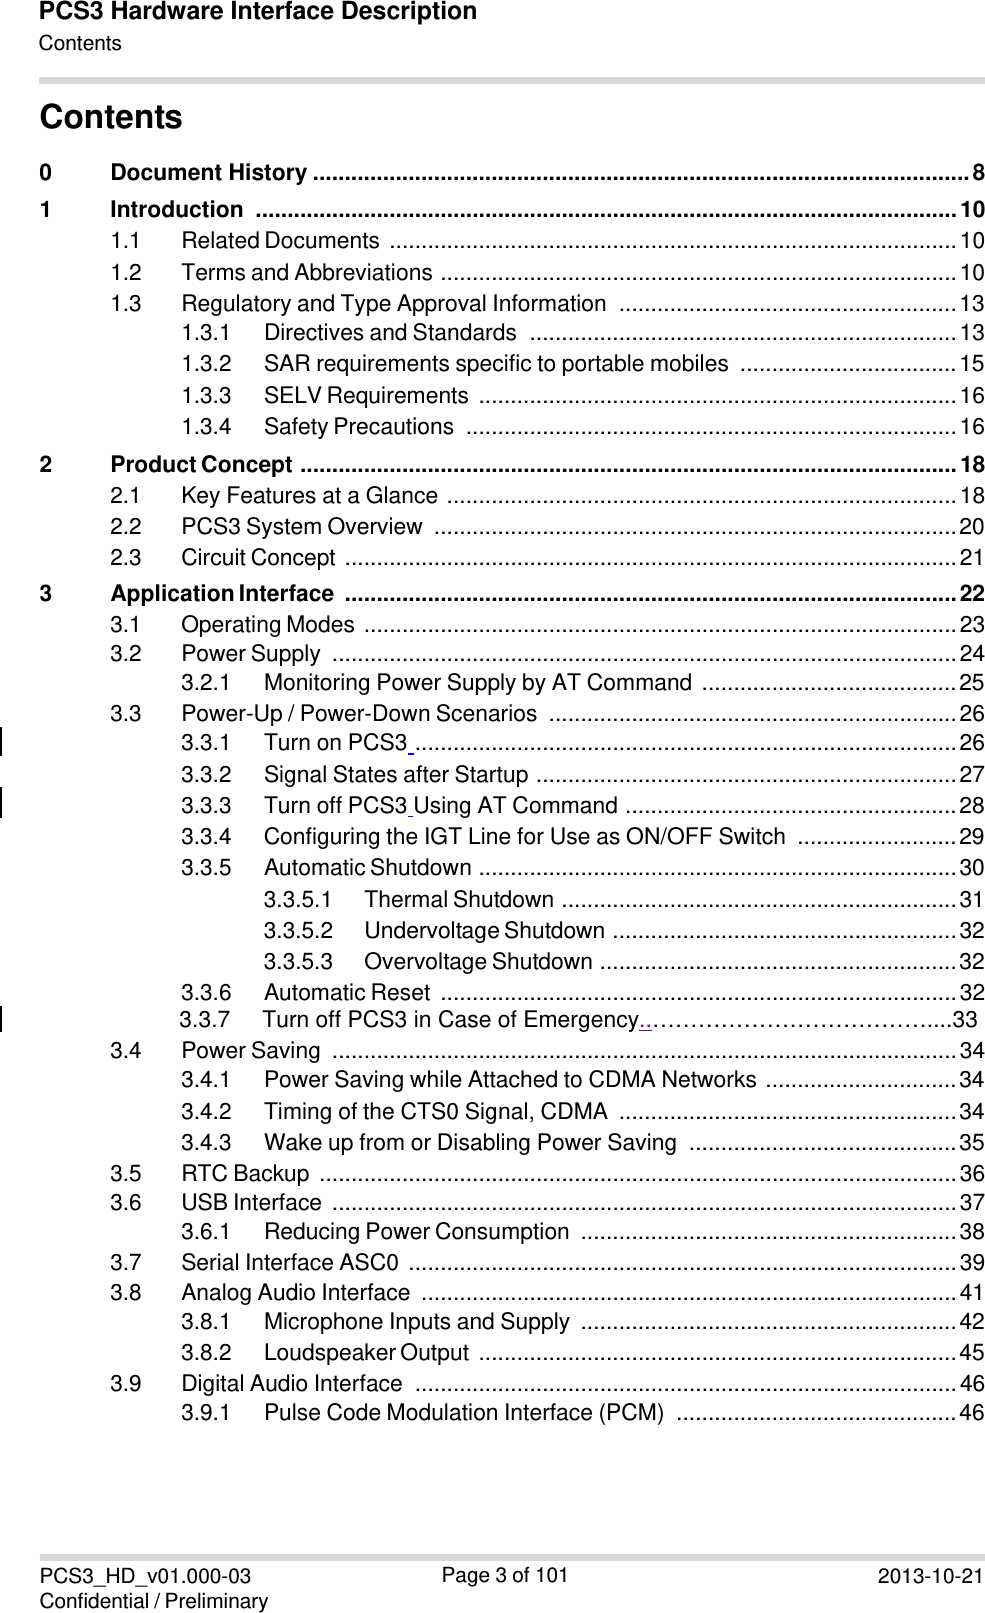 PCS3_HD_v01.000-03 Confidential / Preliminary Page 3 of 101 2013-10-21PCS3 Hardware Interface DescriptionContents  　Contents 0 Document History ....................................................................................................... 8 1 Introduction  .............................................................................................................. 10 1.1 Related Documents  ......................................................................................... 10 1.2 Terms and Abbreviations  ................................................................................. 10 1.3 Regulatory and Type Approval Information  ..................................................... 13 1.3.1 Directives and Standards  ................................................................... 13 1.3.2 SAR requirements specific to portable mobiles  .................................. 15 1.3.3 SELV Requirements  ........................................................................... 16 1.3.4 Safety Precautions  ............................................................................. 16 2 Product Concept  ....................................................................................................... 18 2.1 Key Features at a Glance  ................................................................................ 18 2.2 PCS3 System Overview  .................................................................................. 20 2.3 Circuit Concept  ................................................................................................ 21 3 Application Interface  ................................................................................................ 22 3.1 Operating Modes  ............................................................................................. 23 3.2 Power Supply  .................................................................................................. 24 3.2.1 Monitoring Power Supply by AT Command  ........................................ 25 3.3 Power-Up / Power-Down Scenarios  ................................................................ 26 3.3.1 Turn on PCS3  ..................................................................................... 26 3.3.2 Signal States after Startup  .................................................................. 27 3.3.3 Turn off PCS3 Using AT Command  .................................................... 28 3.3.4 Configuring the IGT Line for Use as ON/OFF Switch  ......................... 29 3.3.5 Automatic Shutdown  ........................................................................... 30 3.3.5.1 Thermal Shutdown  .............................................................. 31 3.3.5.2 Undervoltage Shutdown  ...................................................... 32 3.3.5.3 Overvoltage Shutdown  ........................................................ 32 3.3.6 Automatic Reset  ................................................................................. 32 3.3.7     Turn off PCS3 in Case of Emergency..………………………………....33 3.4 Power Saving  .................................................................................................. 34 3.4.1 Power Saving while Attached to CDMA Networks  .............................. 34 3.4.2 Timing of the CTS0 Signal, CDMA  ..................................................... 34 3.4.3 Wake up from or Disabling Power Saving  .......................................... 35 3.5 RTC Backup  .................................................................................................... 36 3.6 USB Interface  .................................................................................................. 37 3.6.1 Reducing Power Consumption  ........................................................... 38 3.7 Serial Interface ASC0  ...................................................................................... 39 3.8 Analog Audio Interface  .................................................................................... 41 3.8.1 Microphone Inputs and Supply  ........................................................... 42 3.8.2 Loudspeaker Output  ........................................................................... 45 3.9 Digital Audio Interface  ..................................................................................... 46 3.9.1 Pulse Code Modulation Interface (PCM)  ............................................ 46 